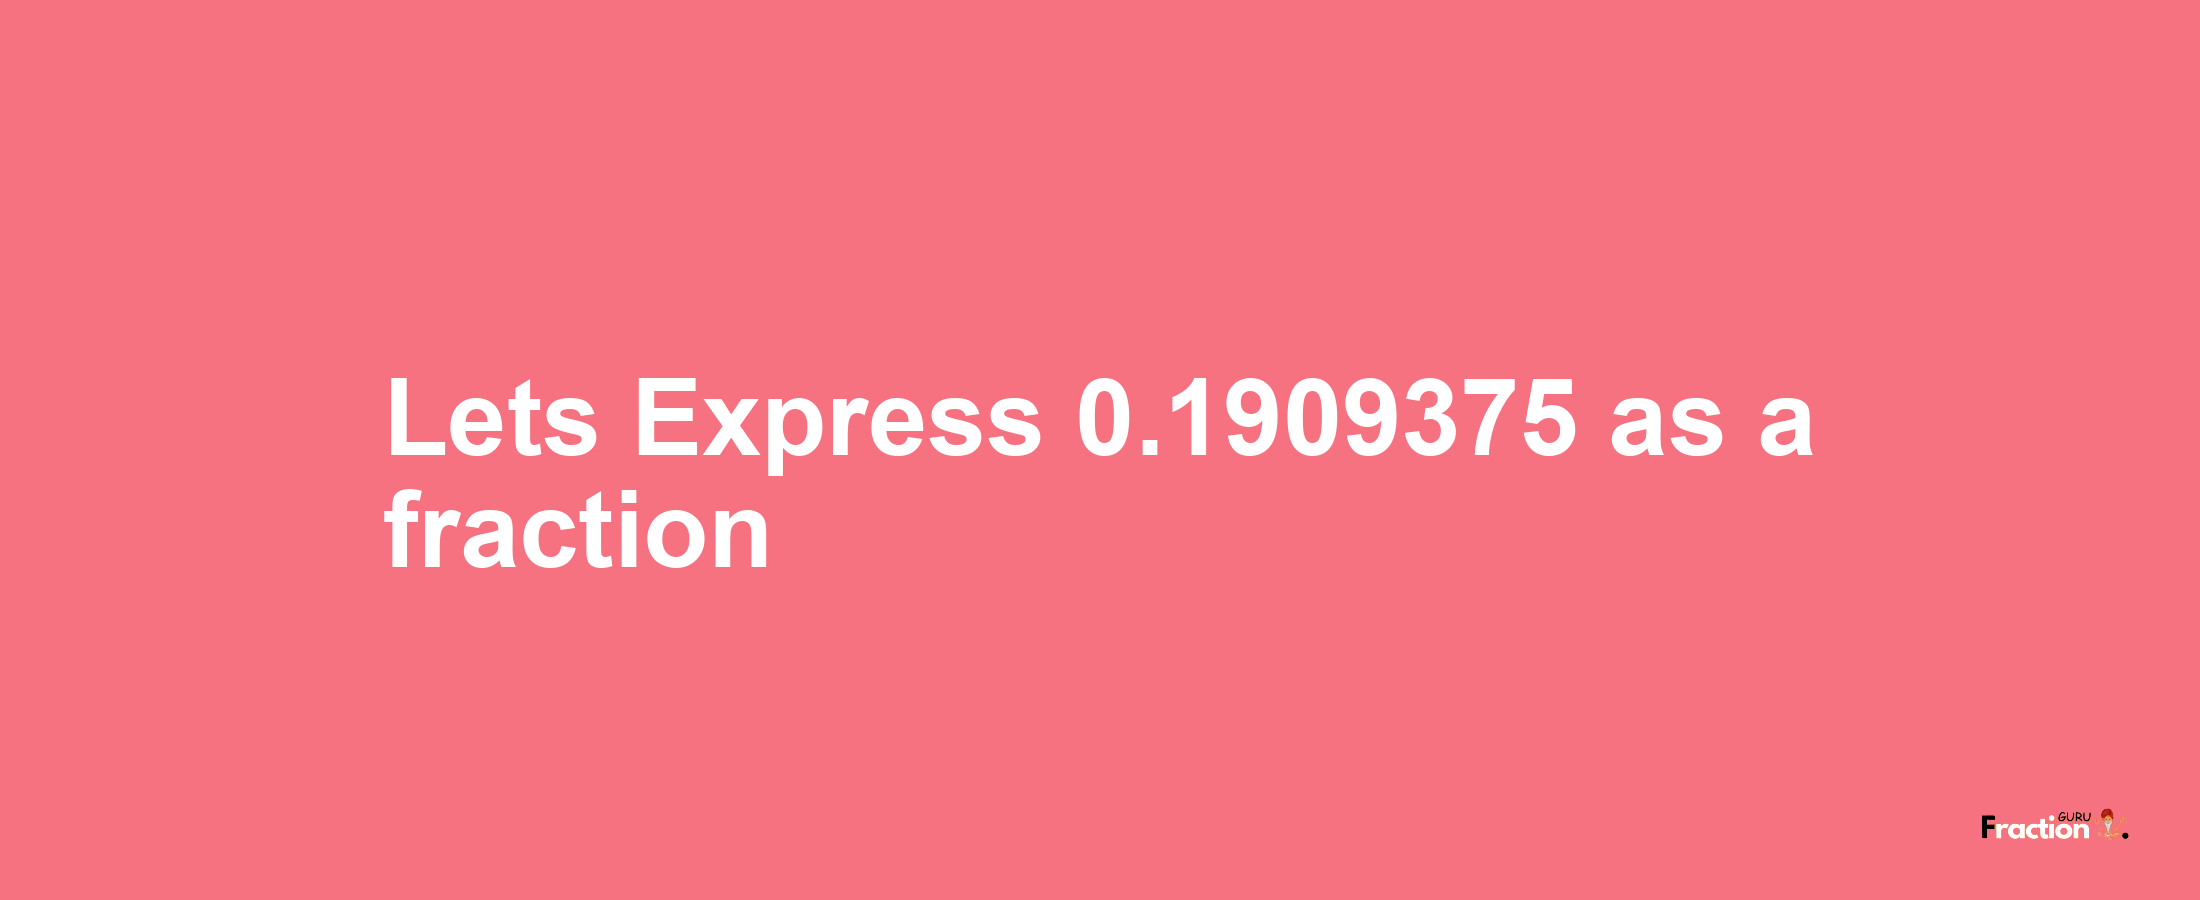 Lets Express 0.1909375 as afraction